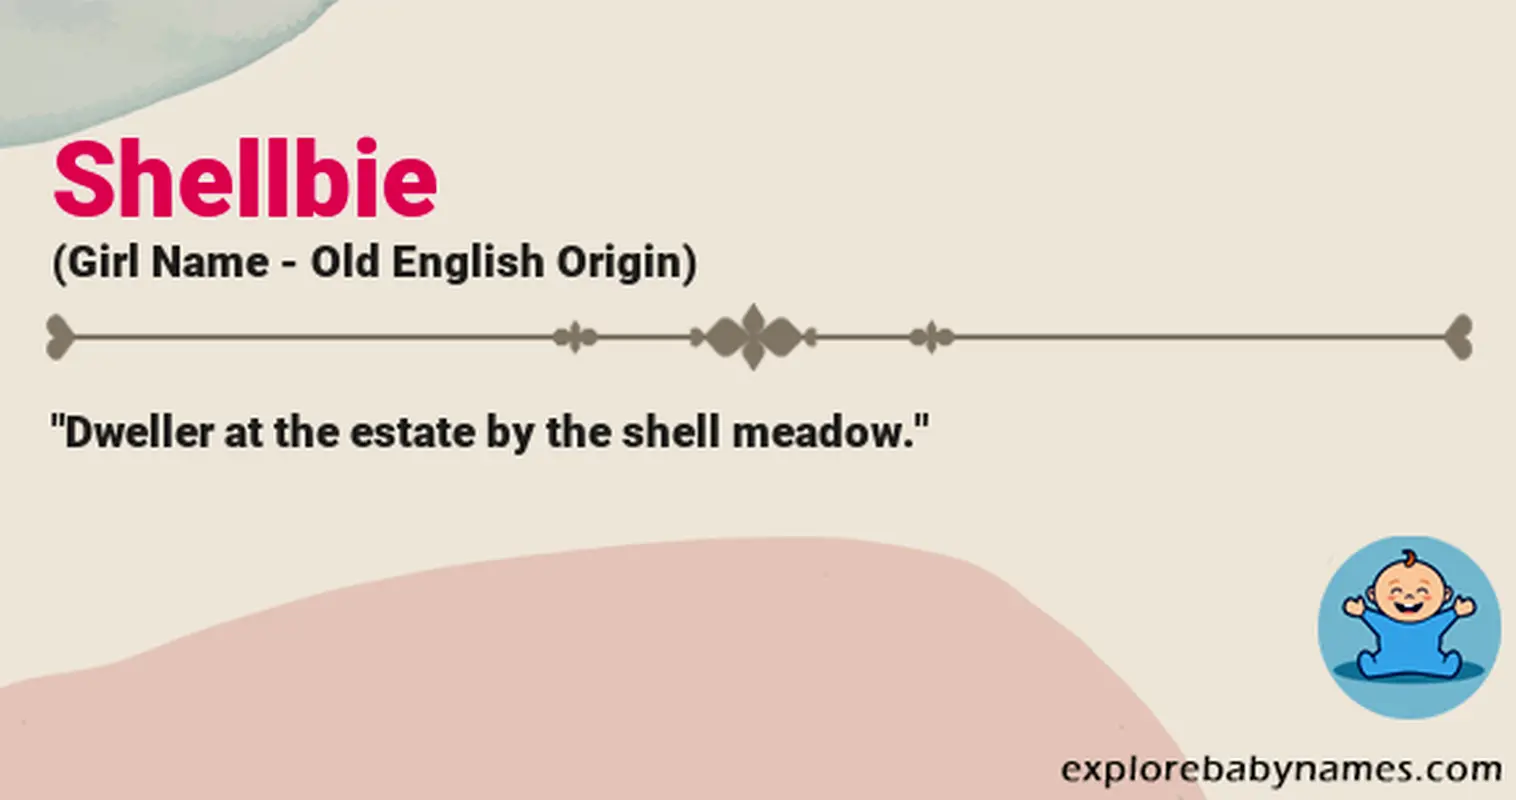 Meaning of Shellbie